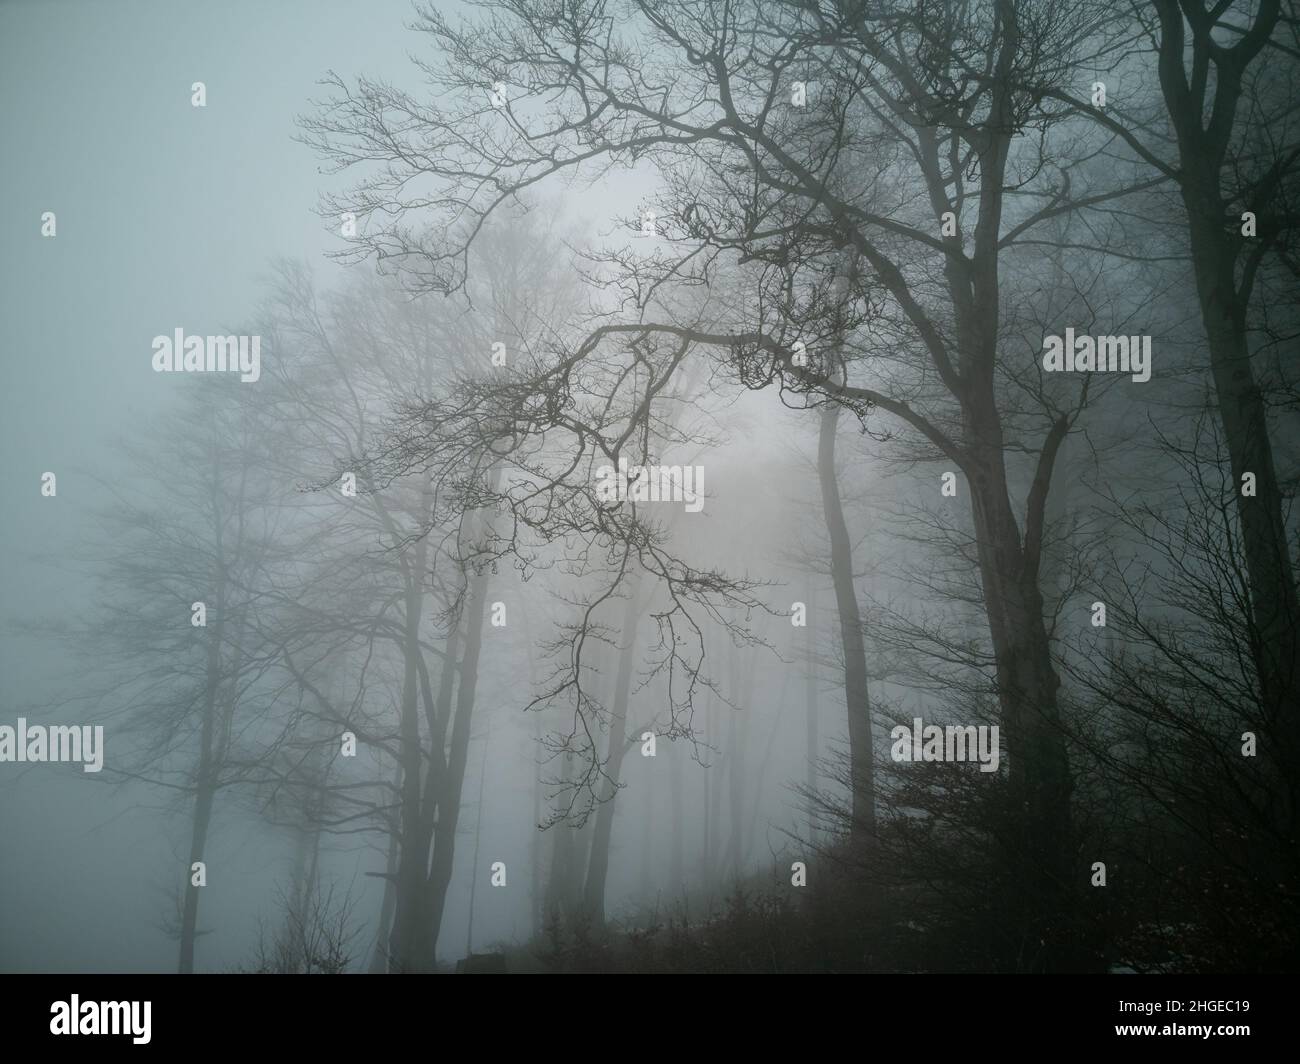 In winter, the fog makes the colors look pale. Trees and bushes in the forest are just silhouettes in a mystical environment. Stock Photo